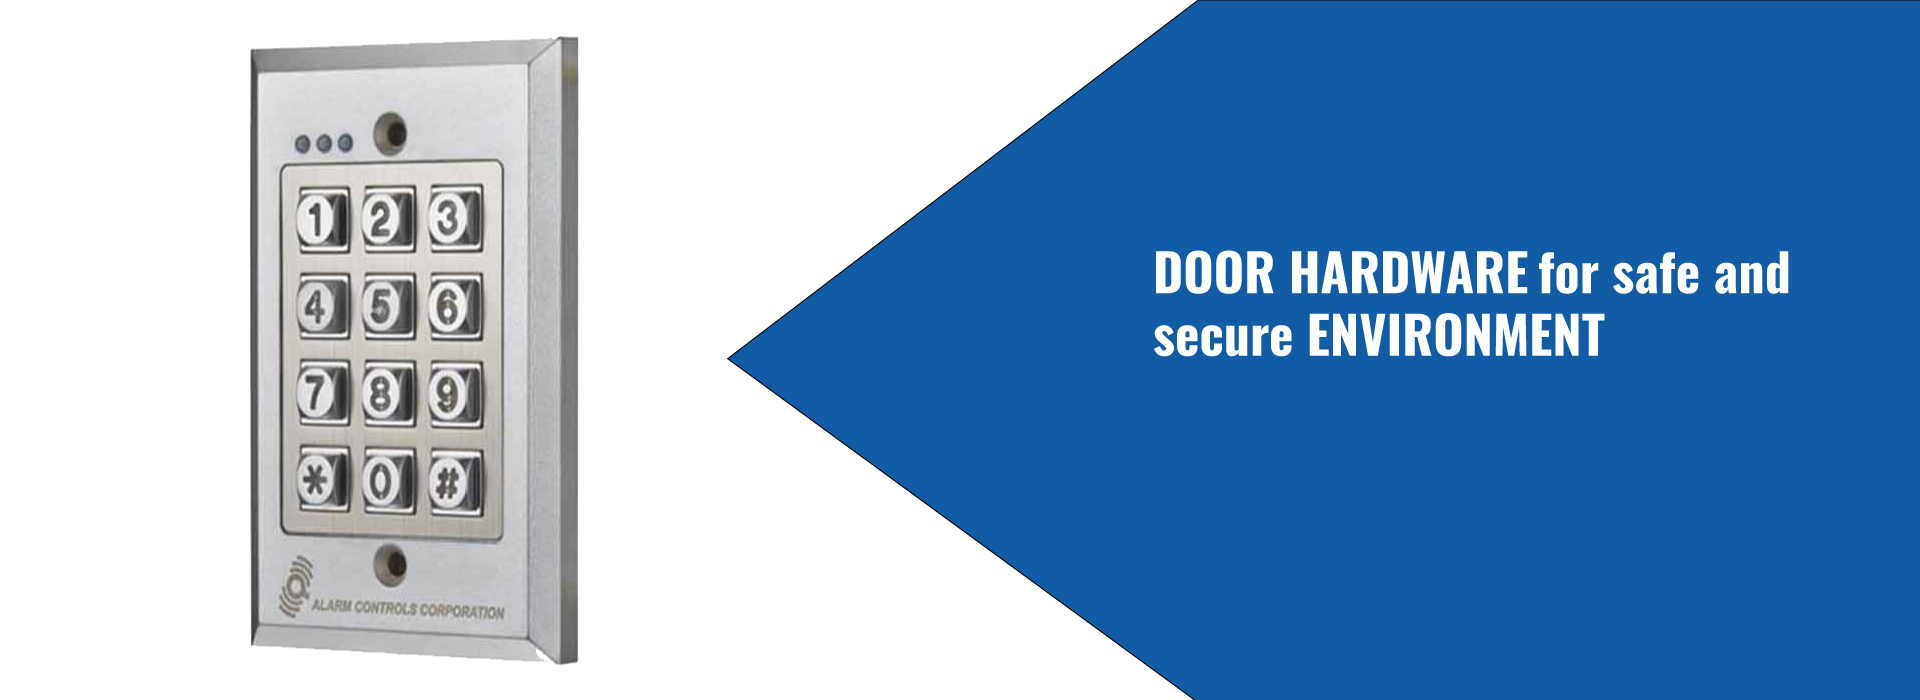 Door Hardware for Safe and Secure Environment